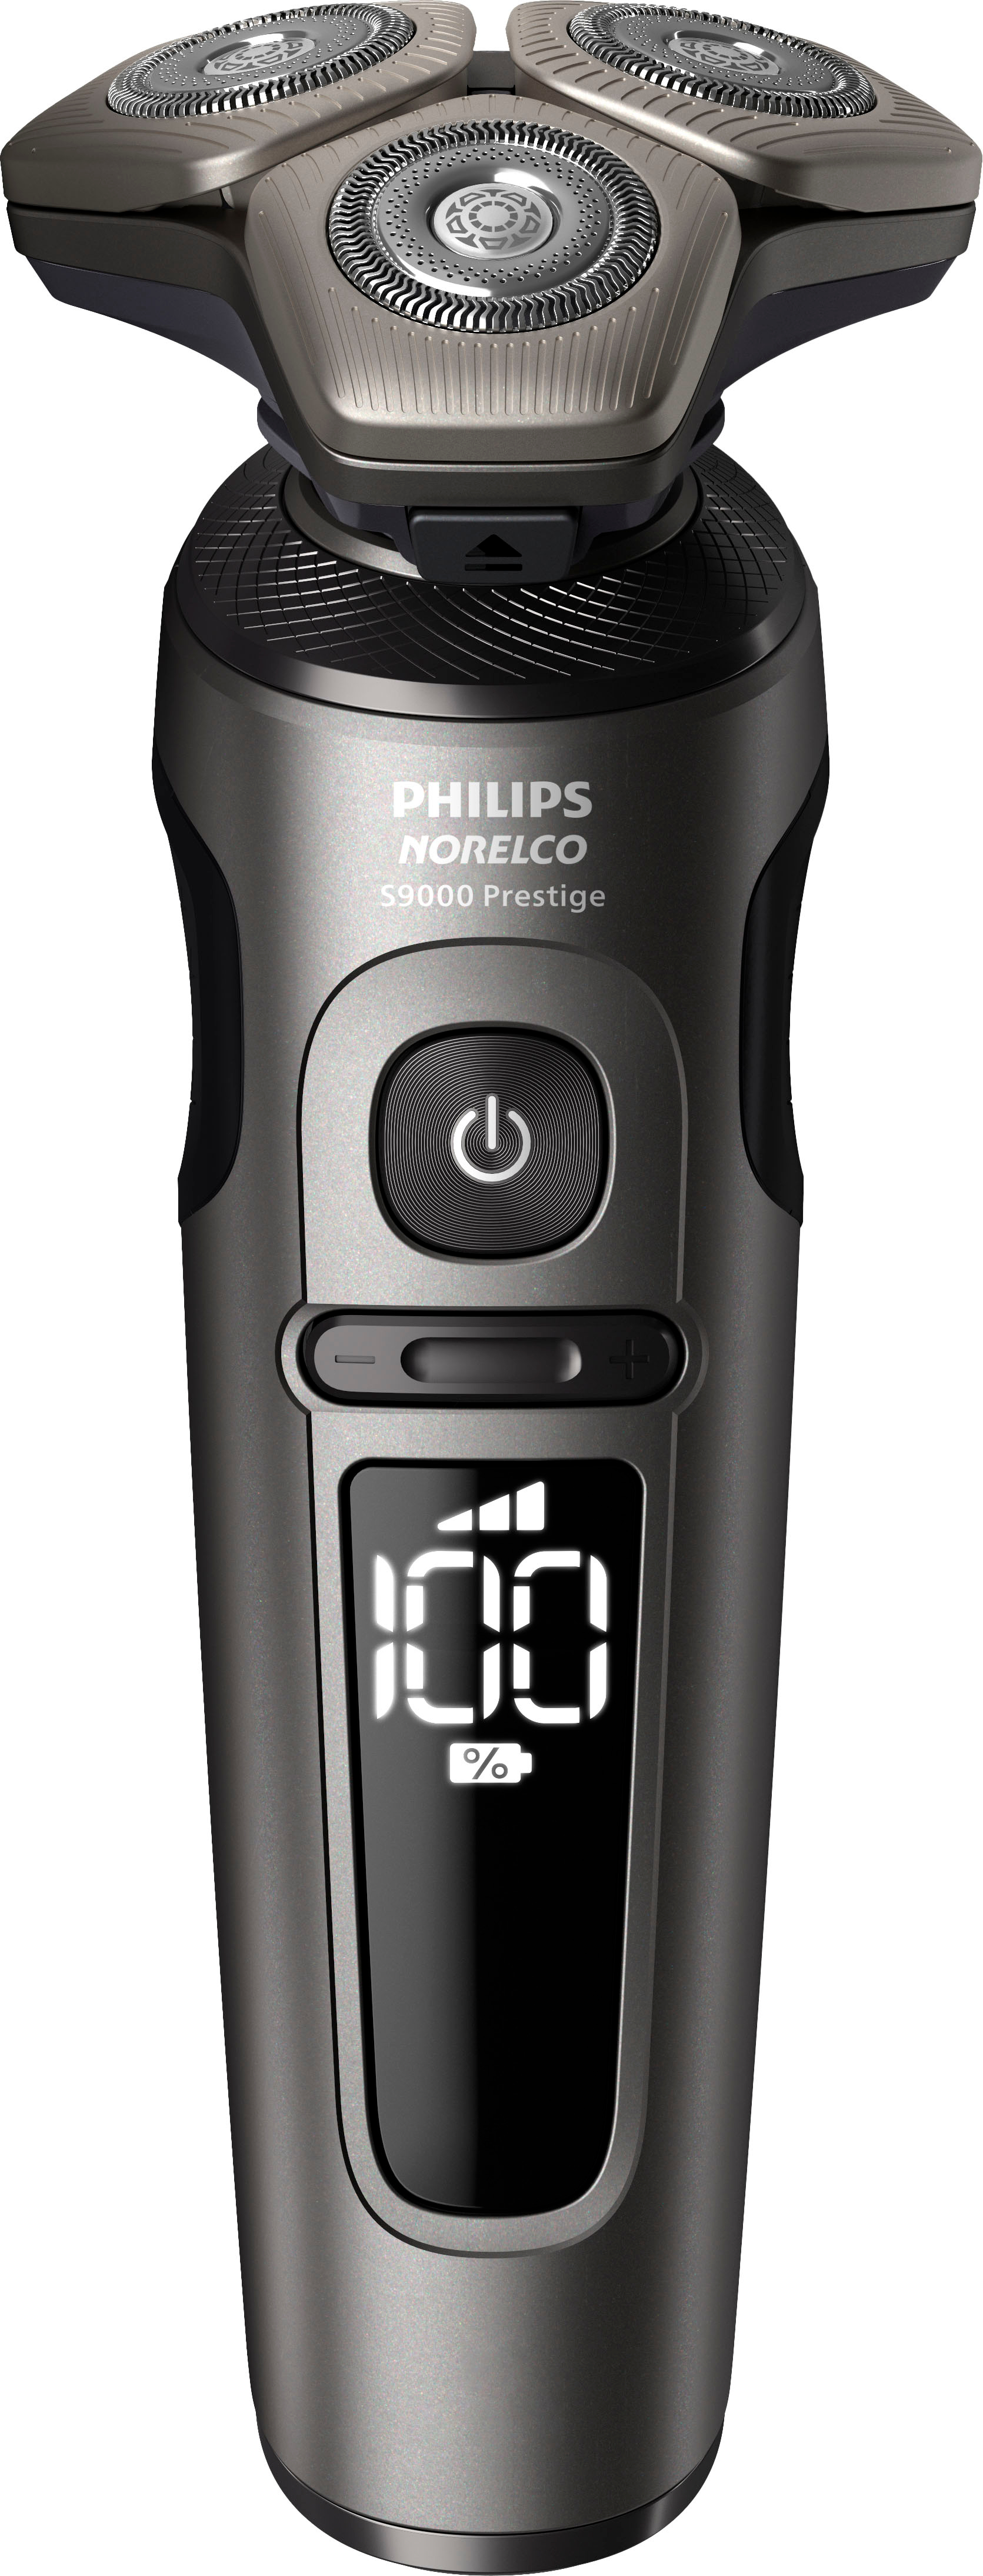 Philips Norelco 9000 Best Shaver Buy SP9872/86 Pad Black Charging - Qi Prestige SP9872/86 with